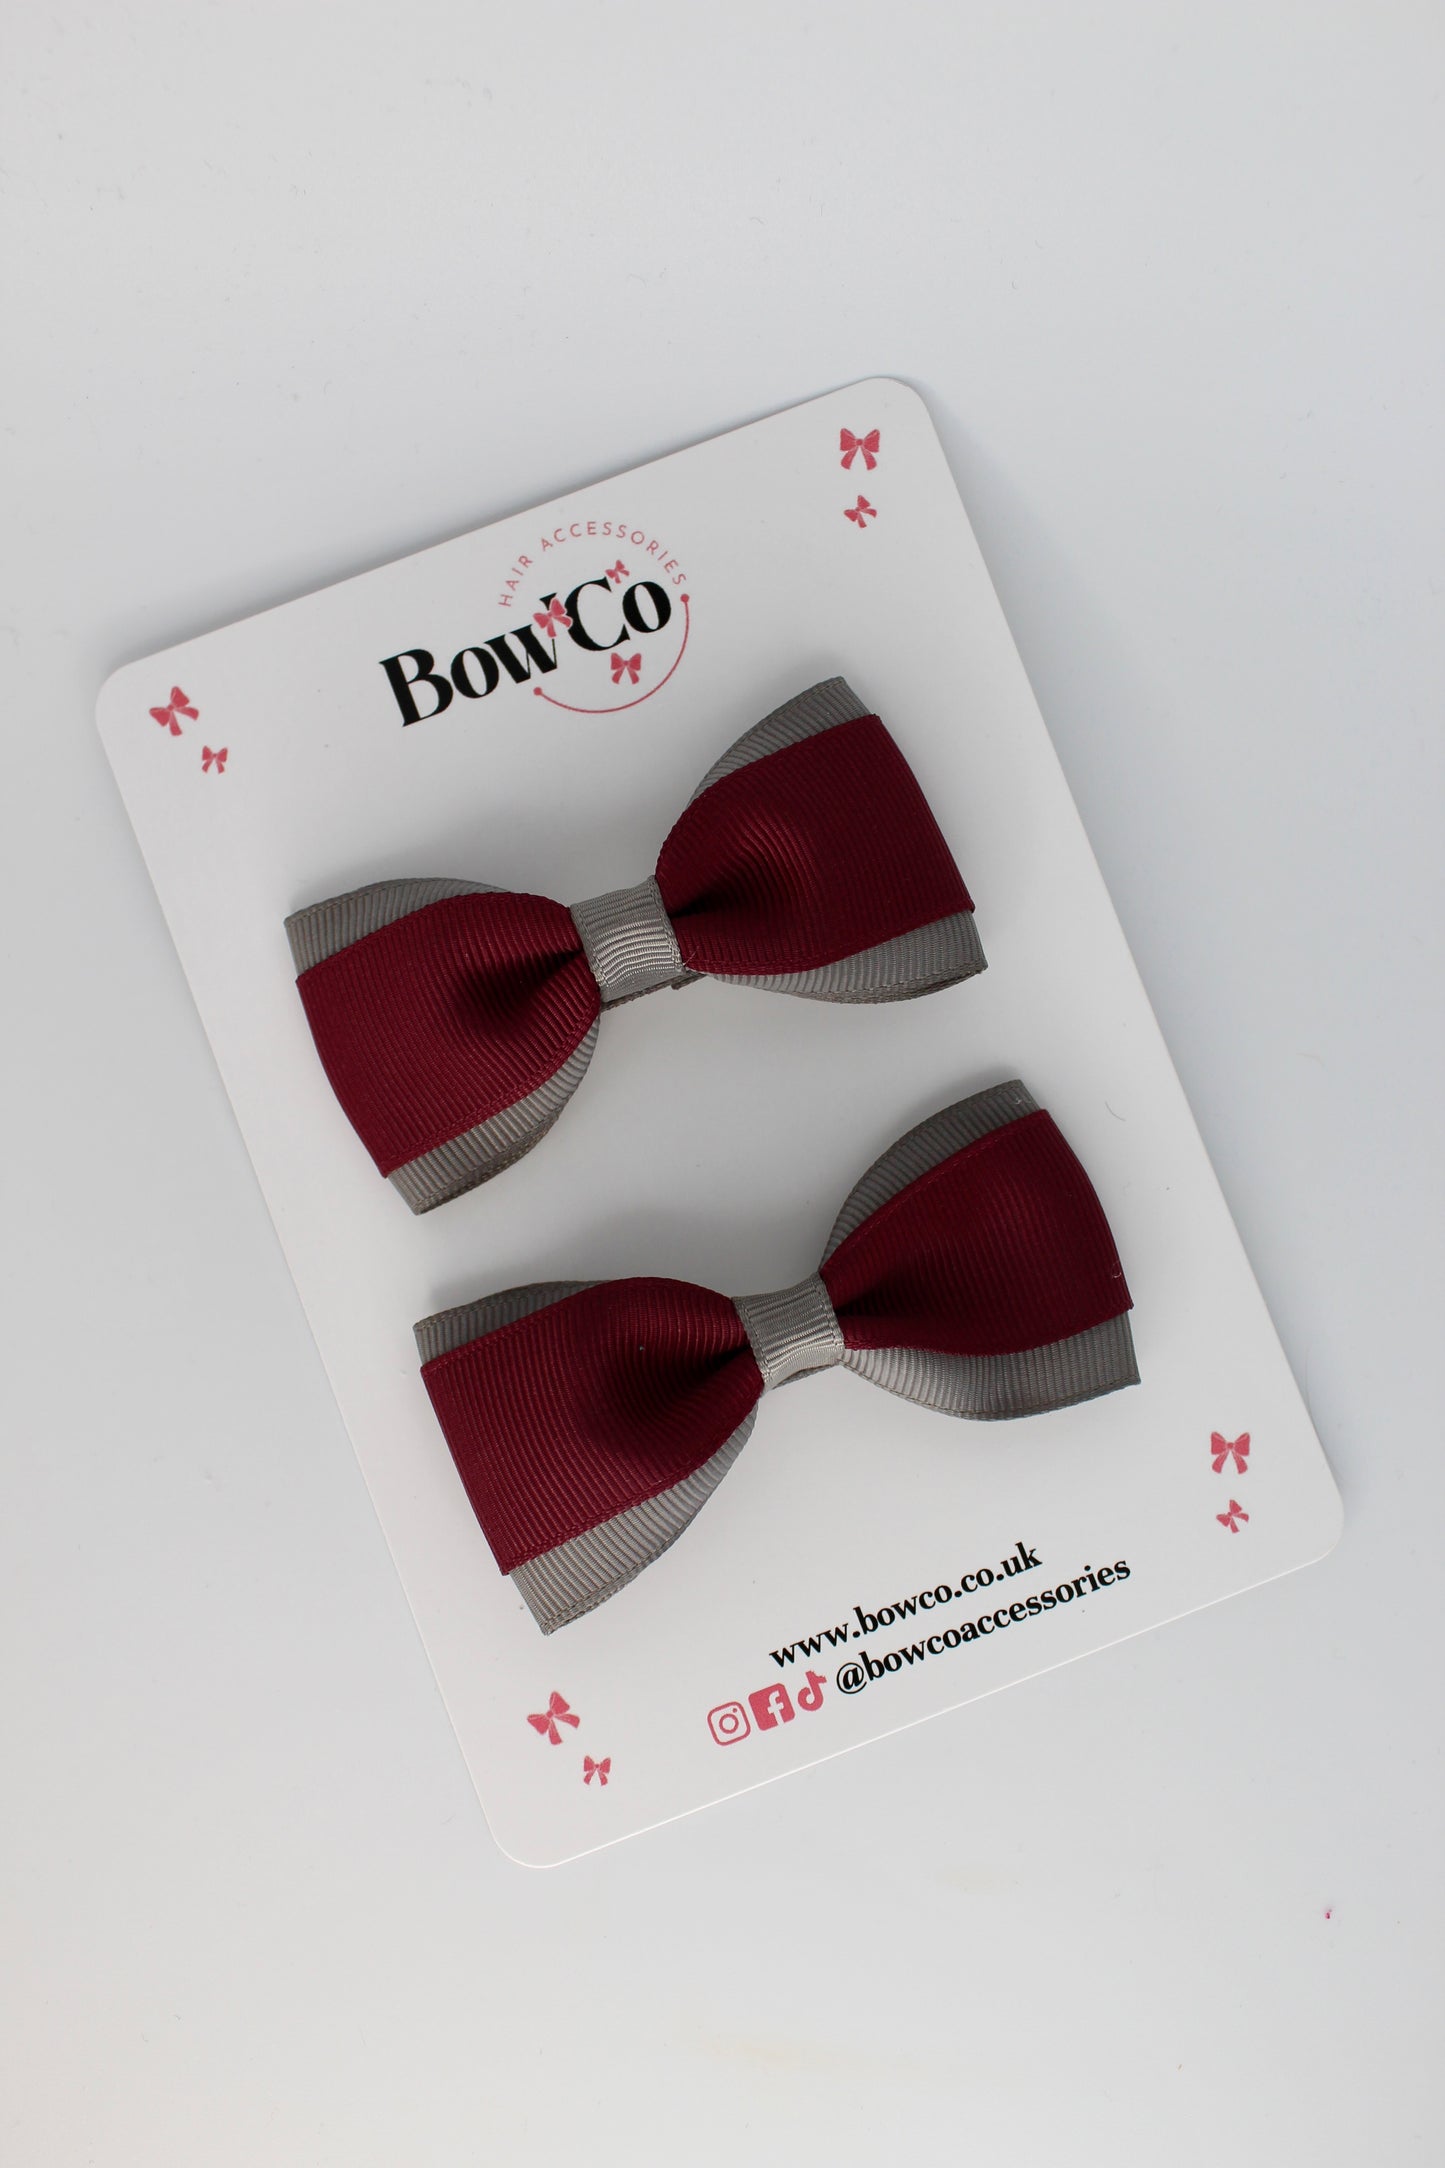 3 Inch Tuxedo Bow - Clip - 2 Pack - Burgundy and Metal Grey